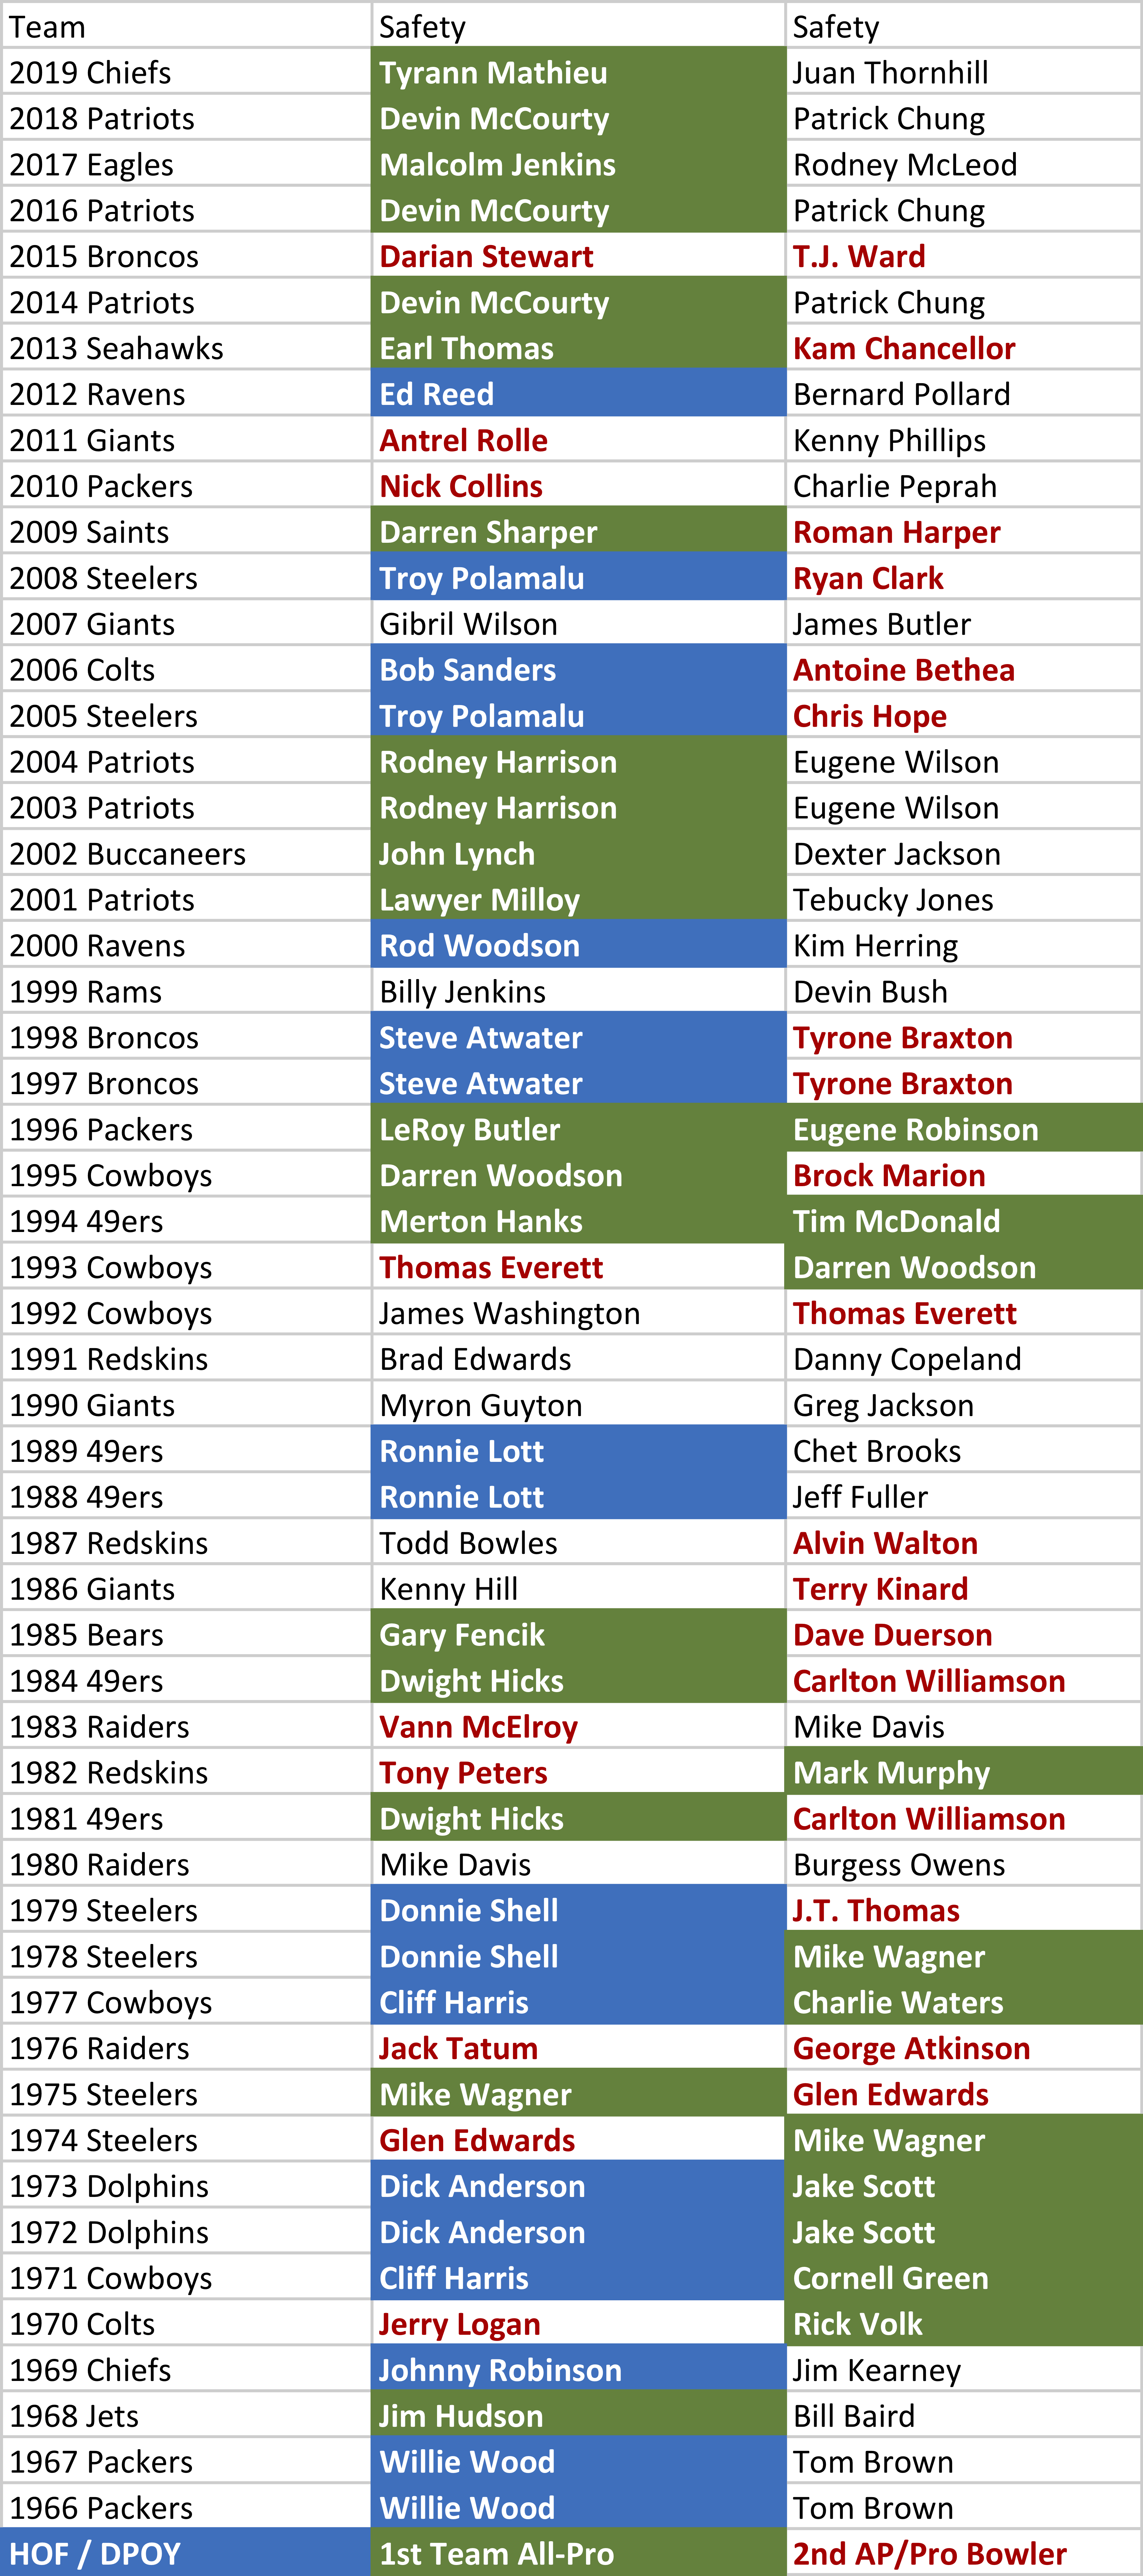 List of players who've won the Super Bowl with multiple teams